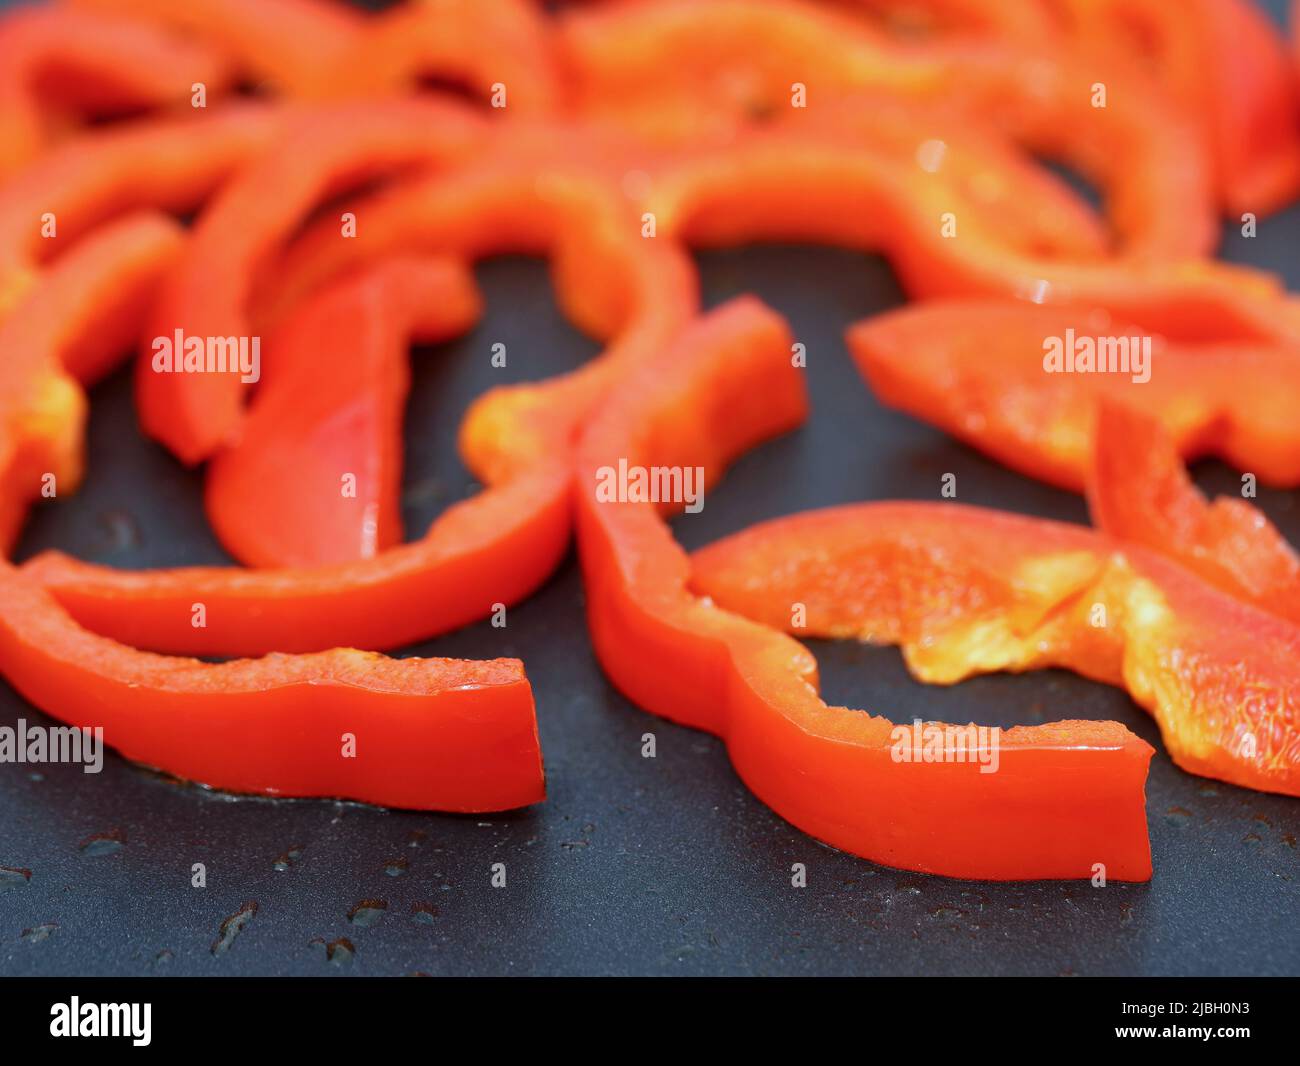 Close-up of sliced red peppers on non-stick griddle, healthy vegetable for grill or stir-fry Stock Photo